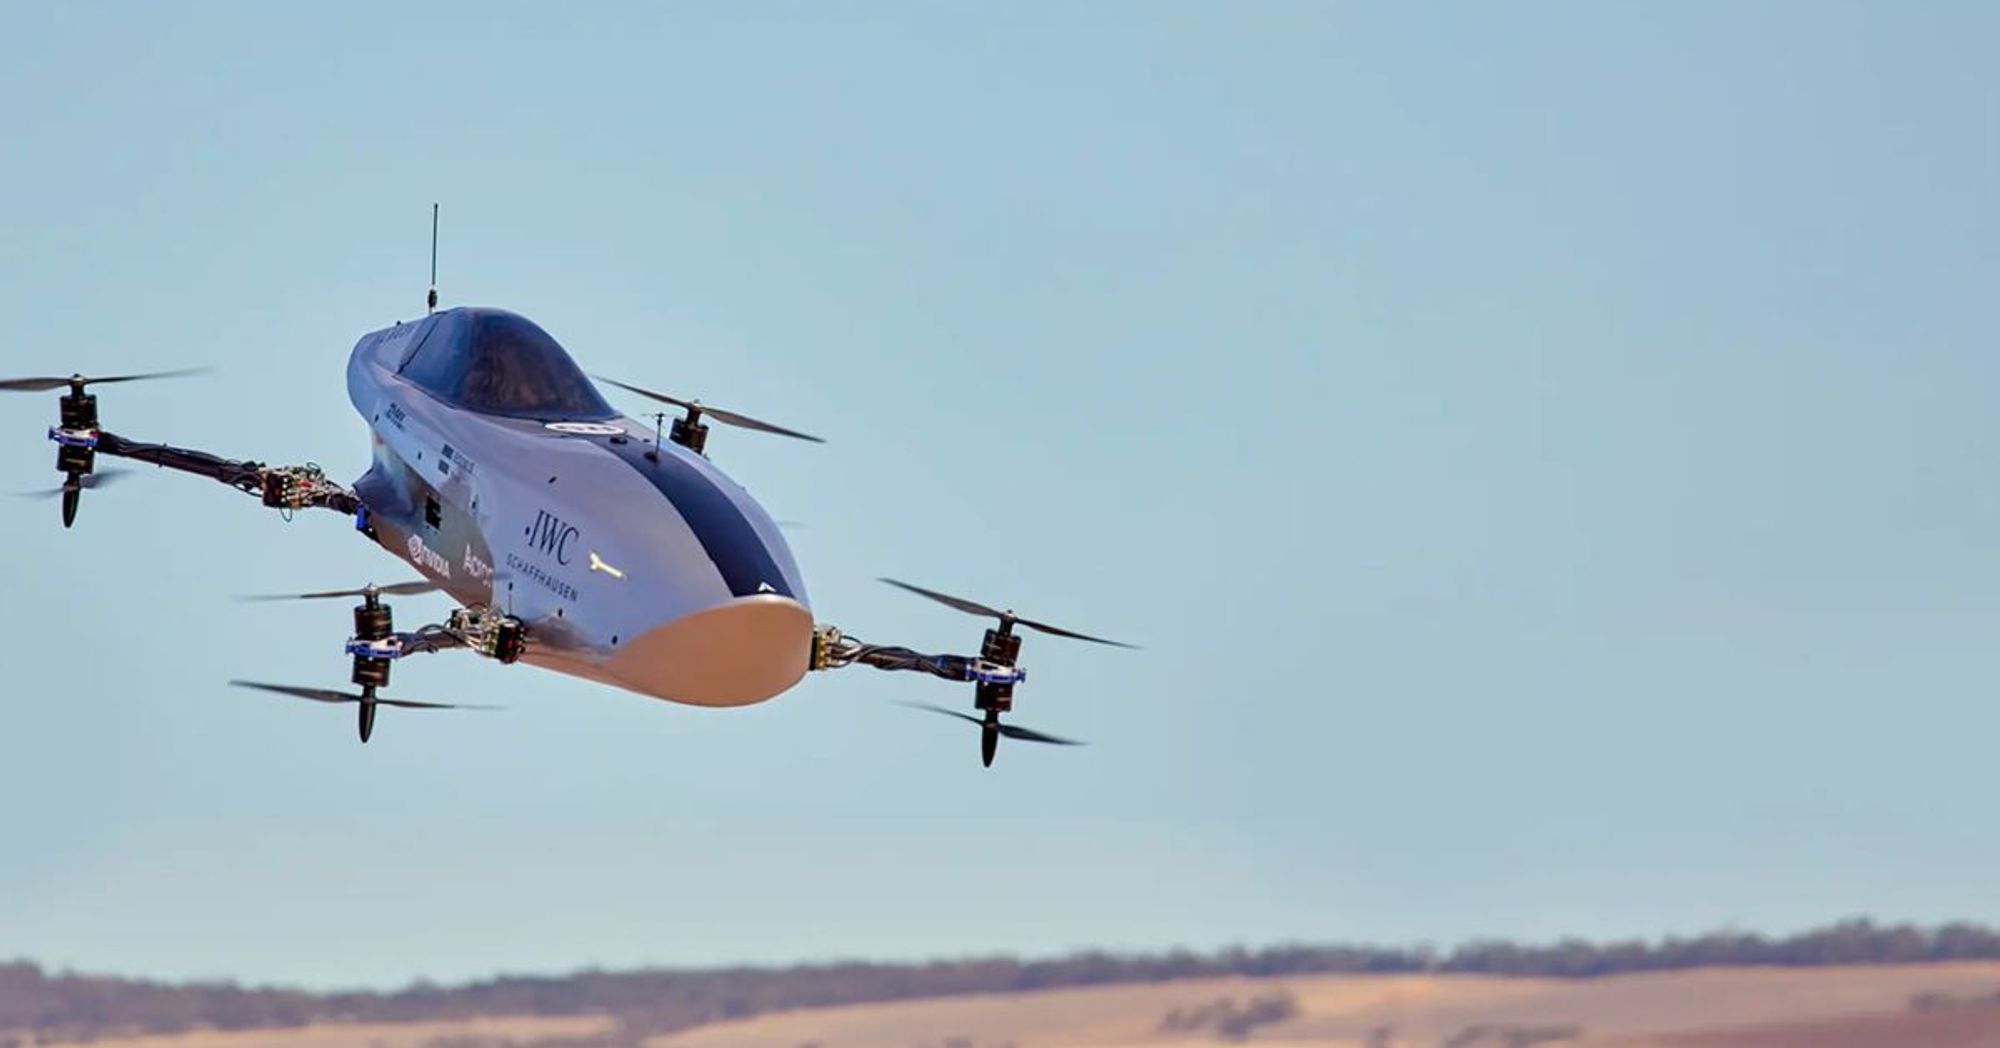 Airspeeder says it had the first successful test flight for its electric flying racecar